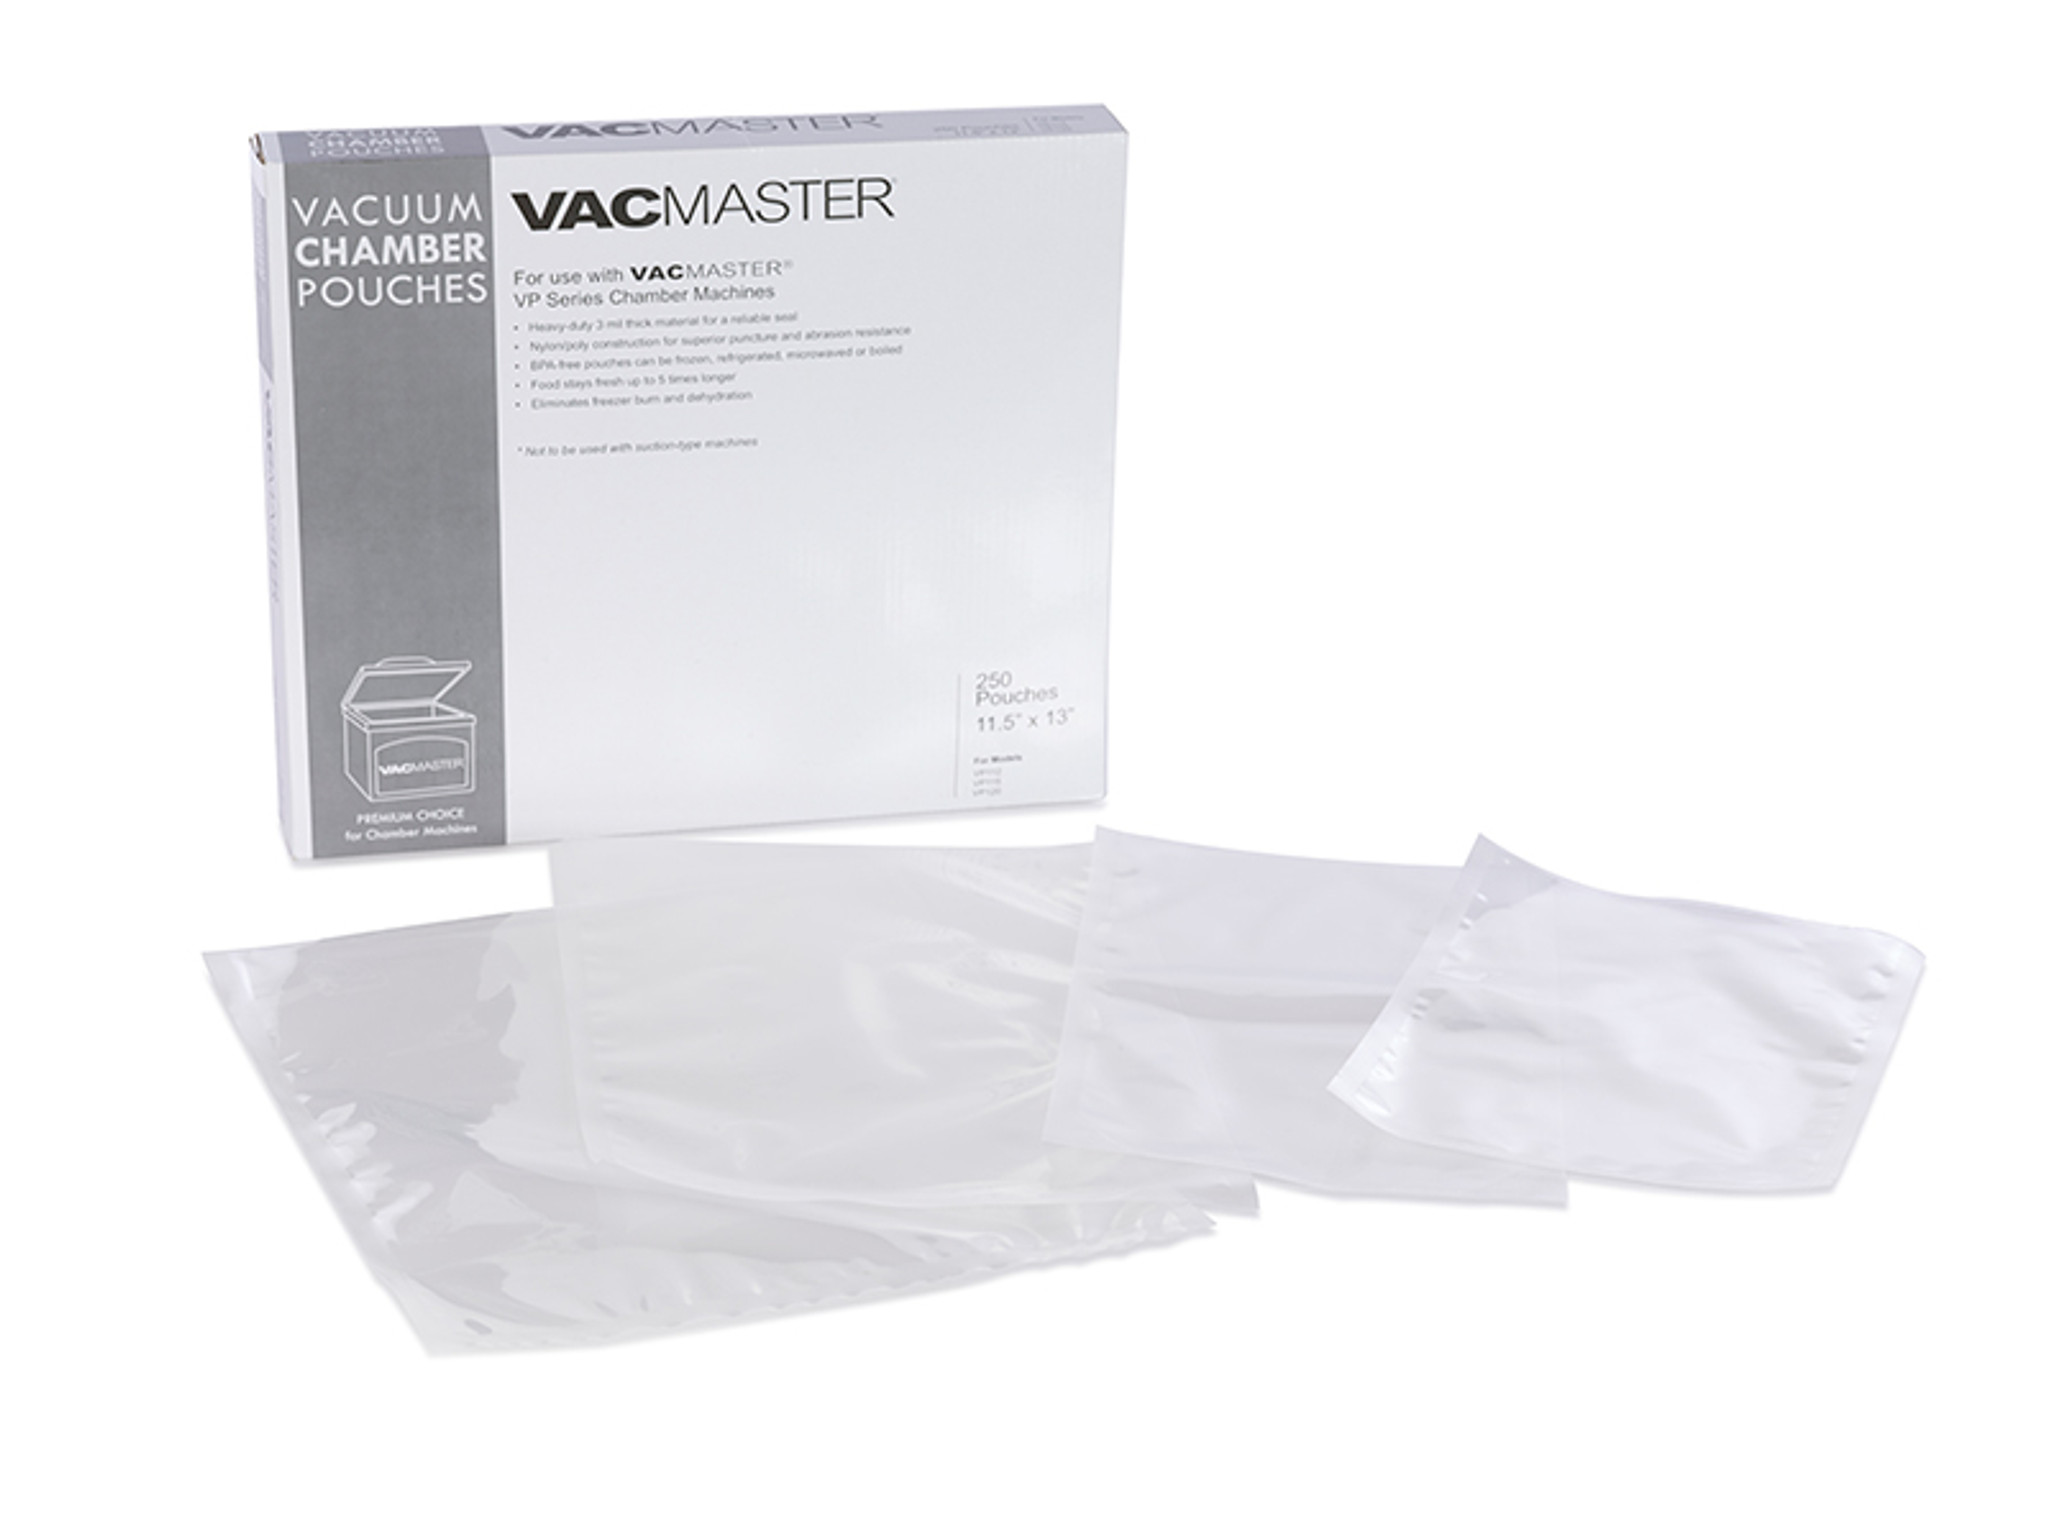 VacPak-It 186CVB610 6 x 10 Chamber Vacuum Packaging Pouches / Bags 3 Mil  - 1000/Case